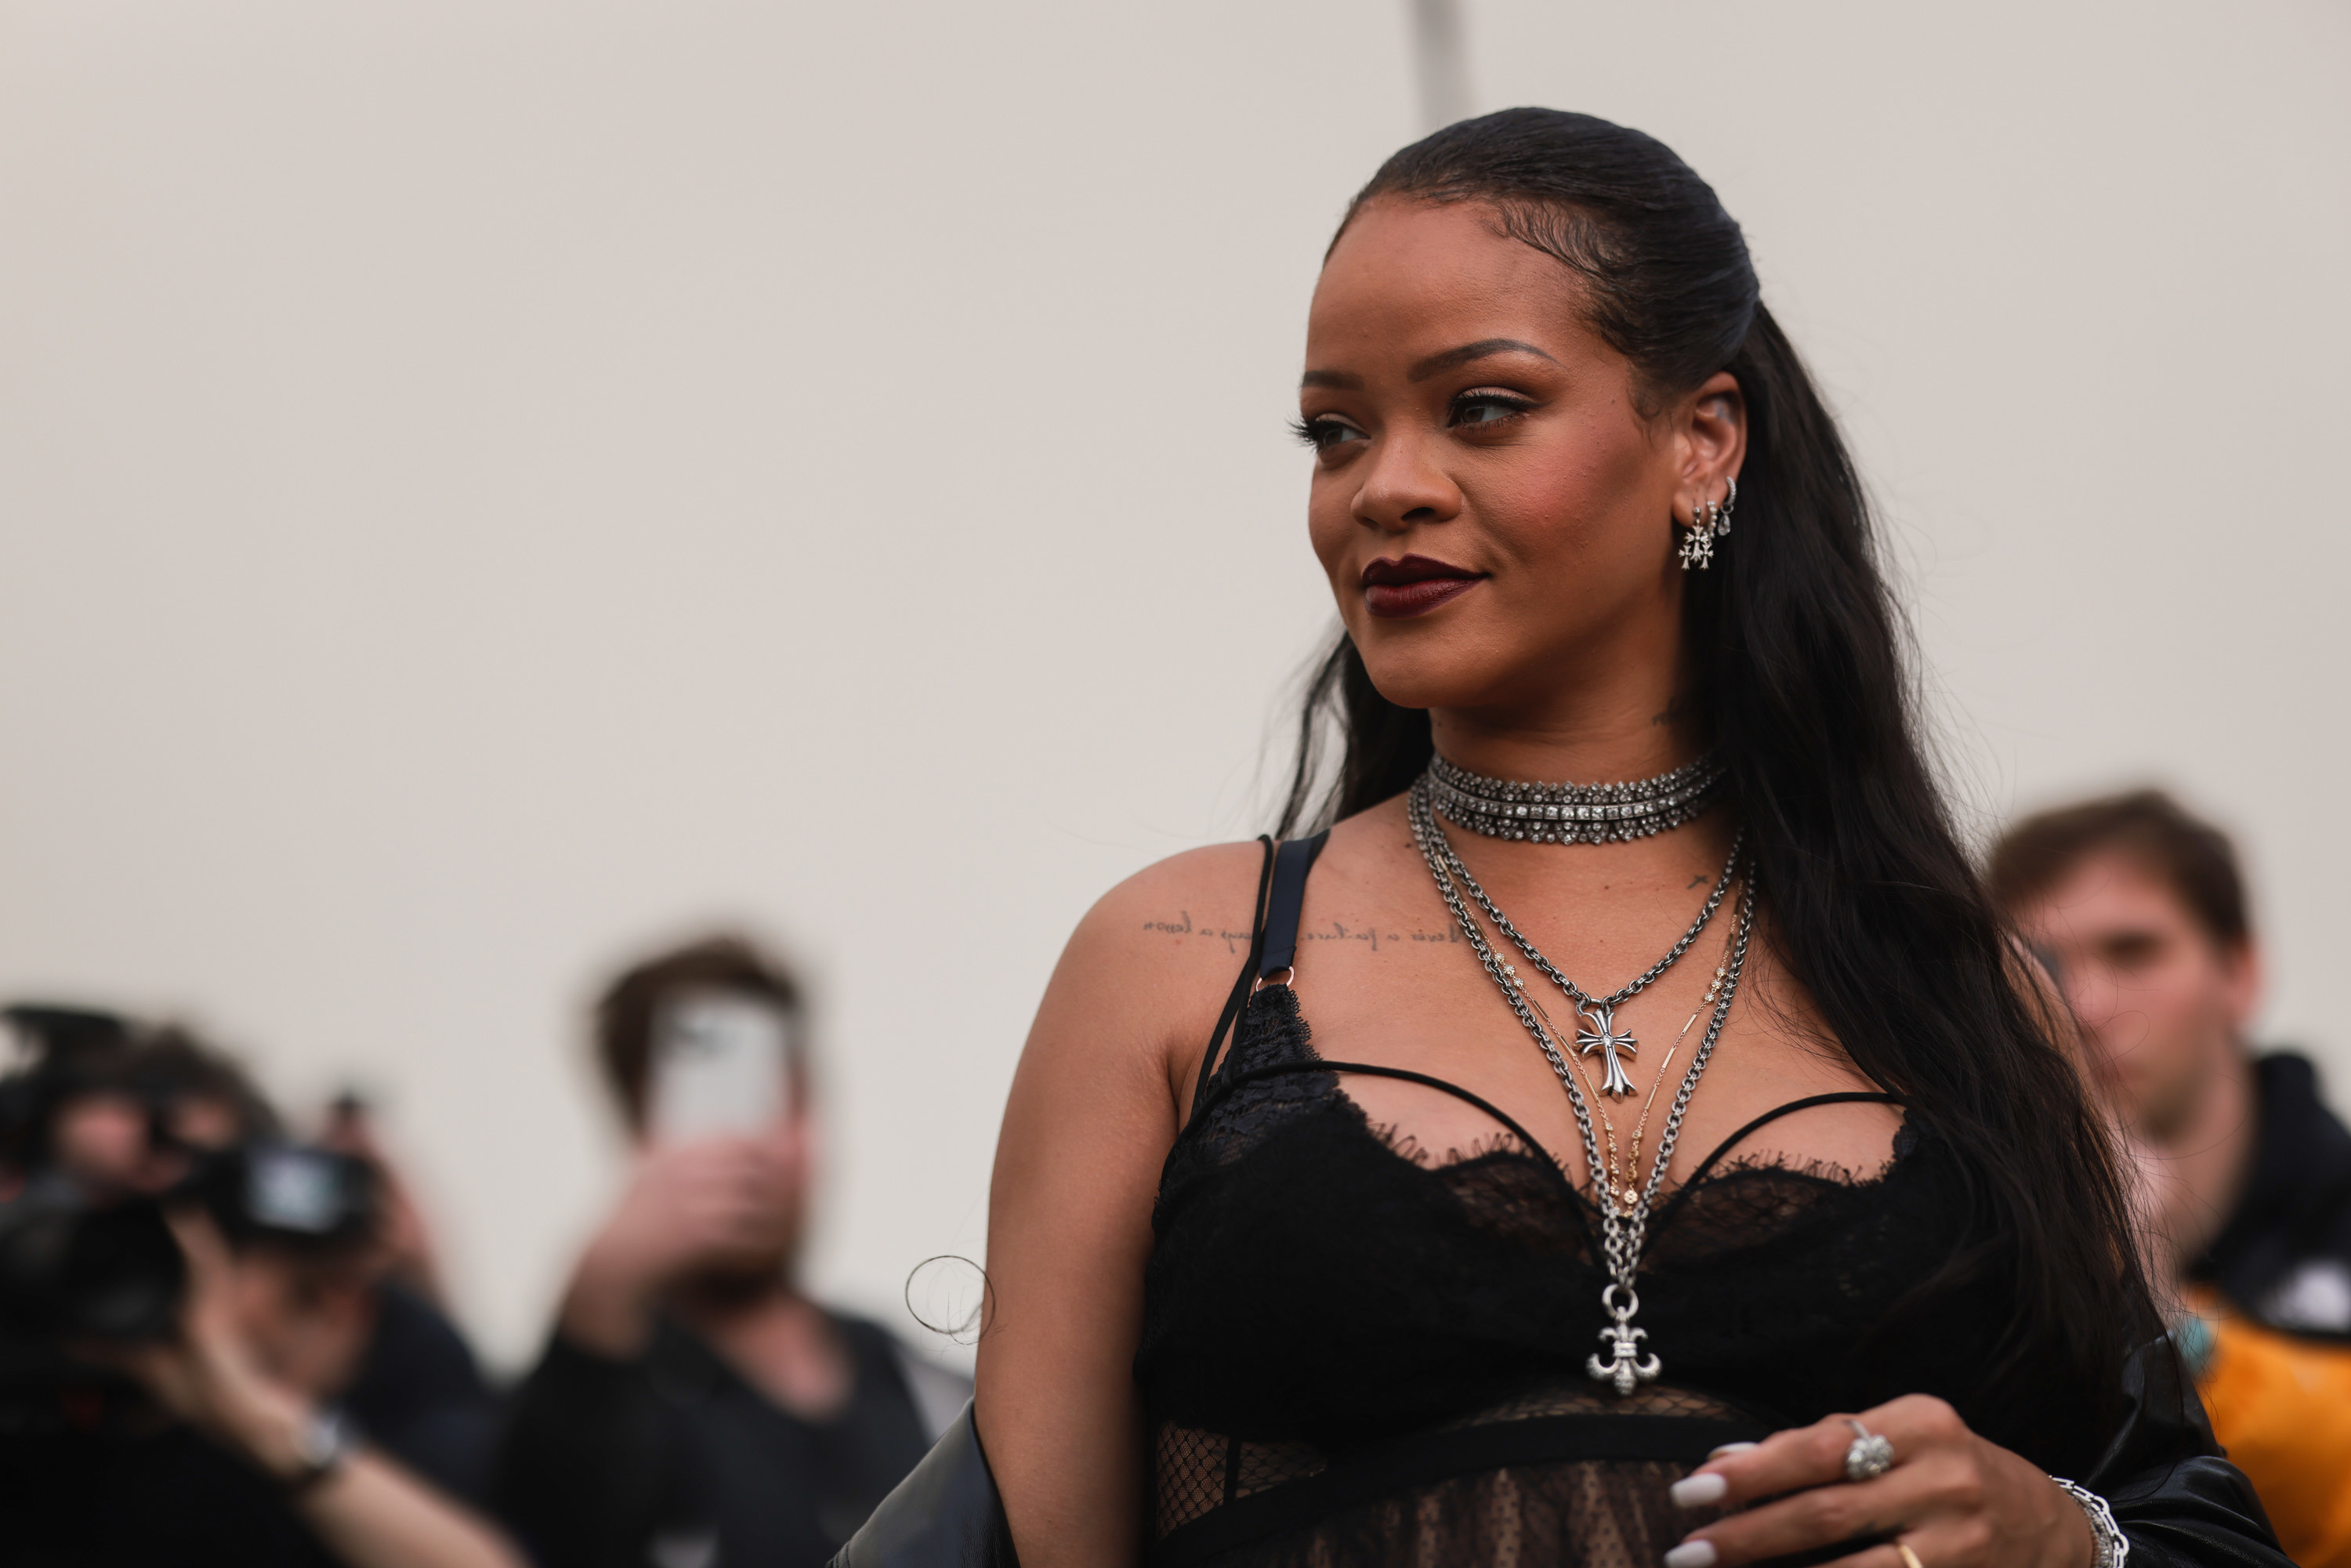 Rihanna On Her Pregnancy And A$AP Rocky Relationship